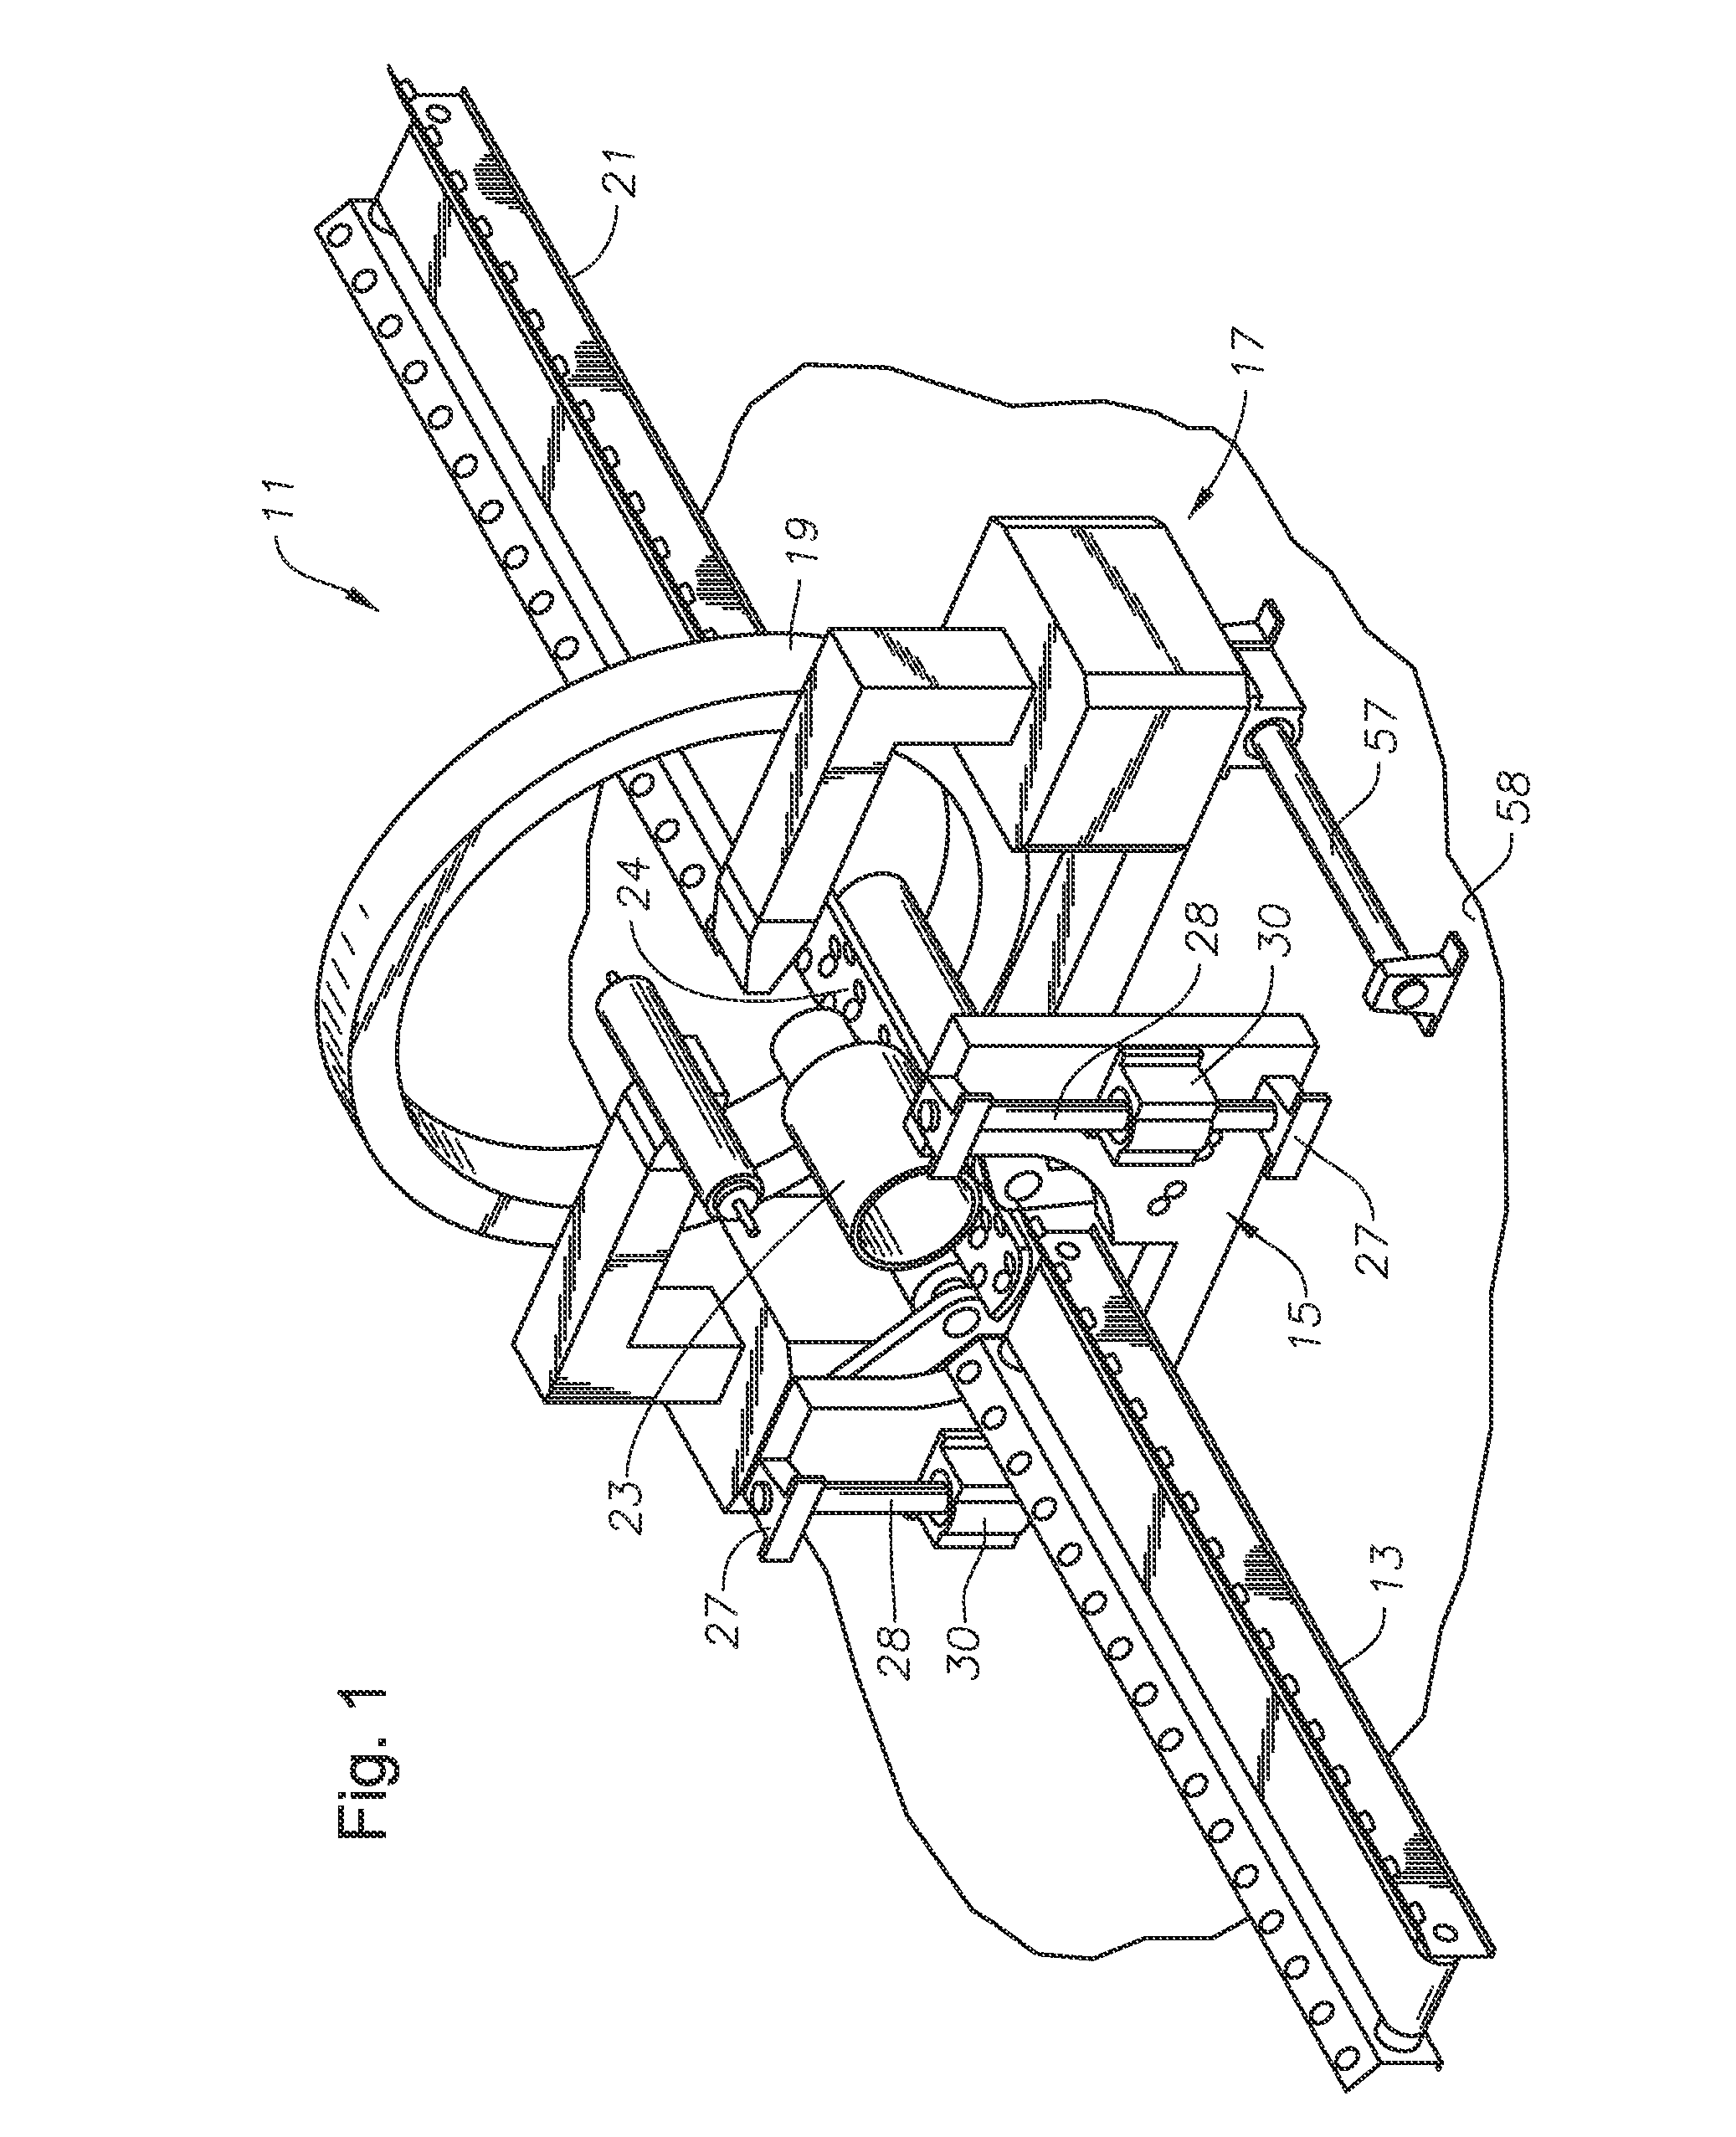 Method and apparatus for special end area inspection